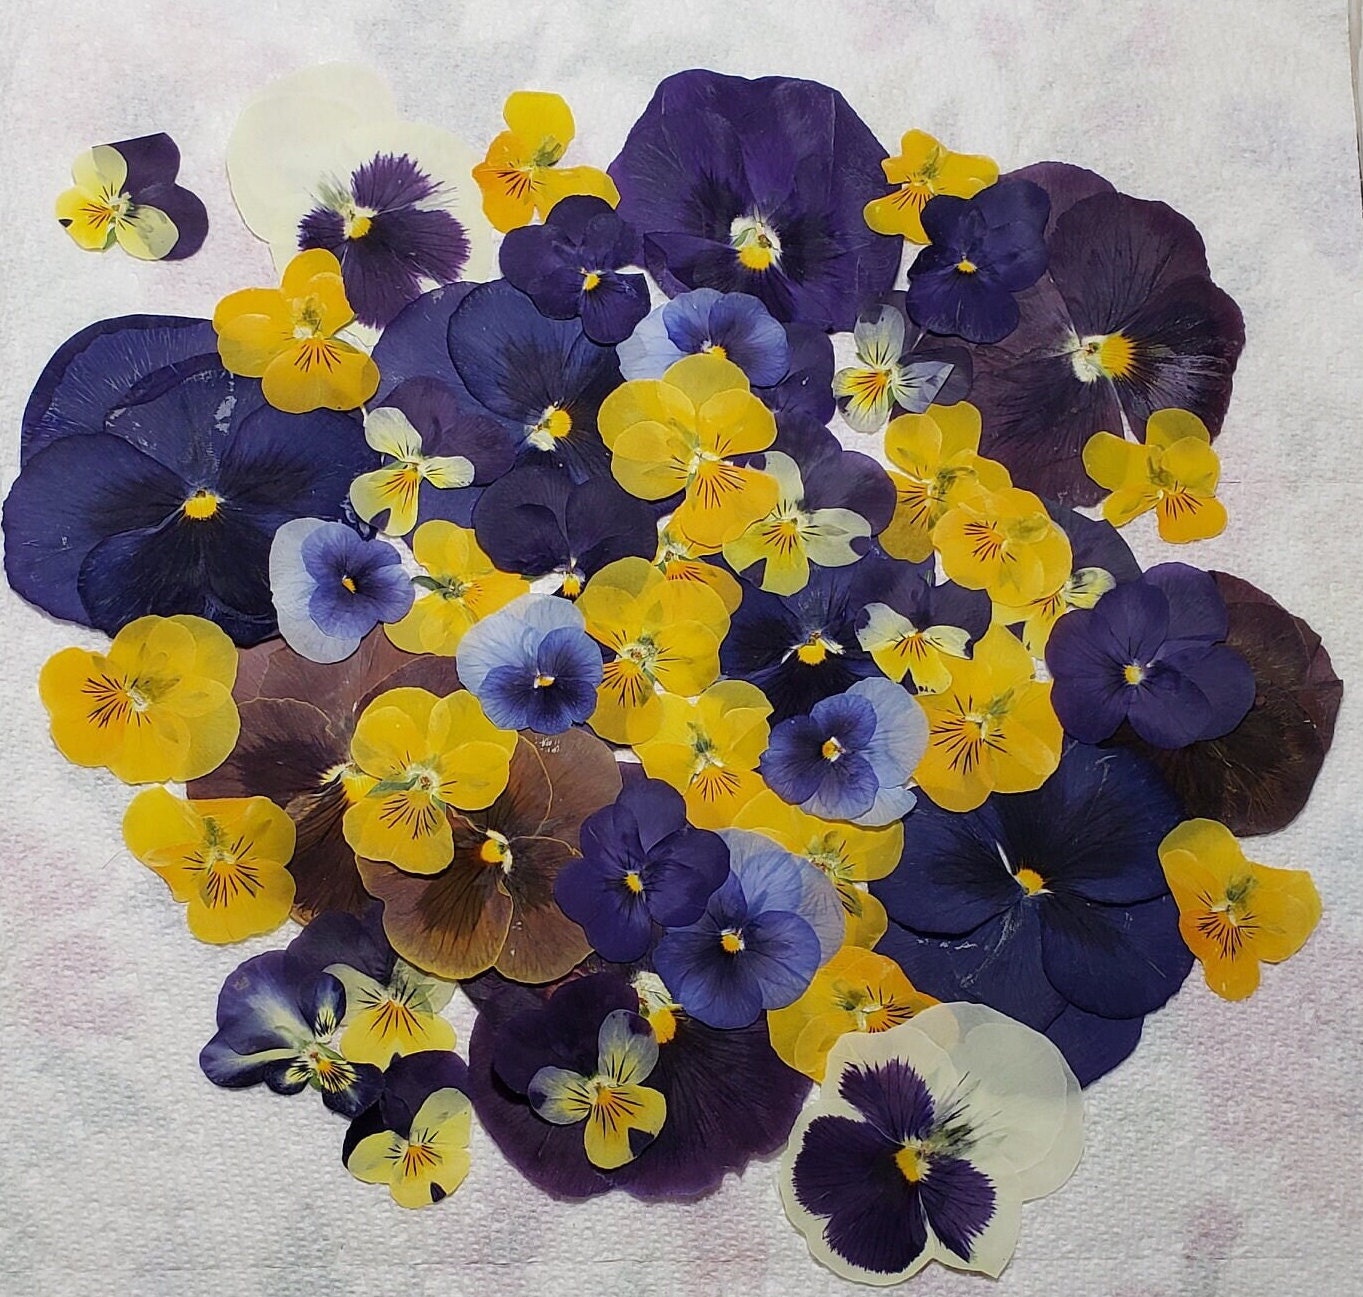 Edible Flowers Pansy 50 Ct 